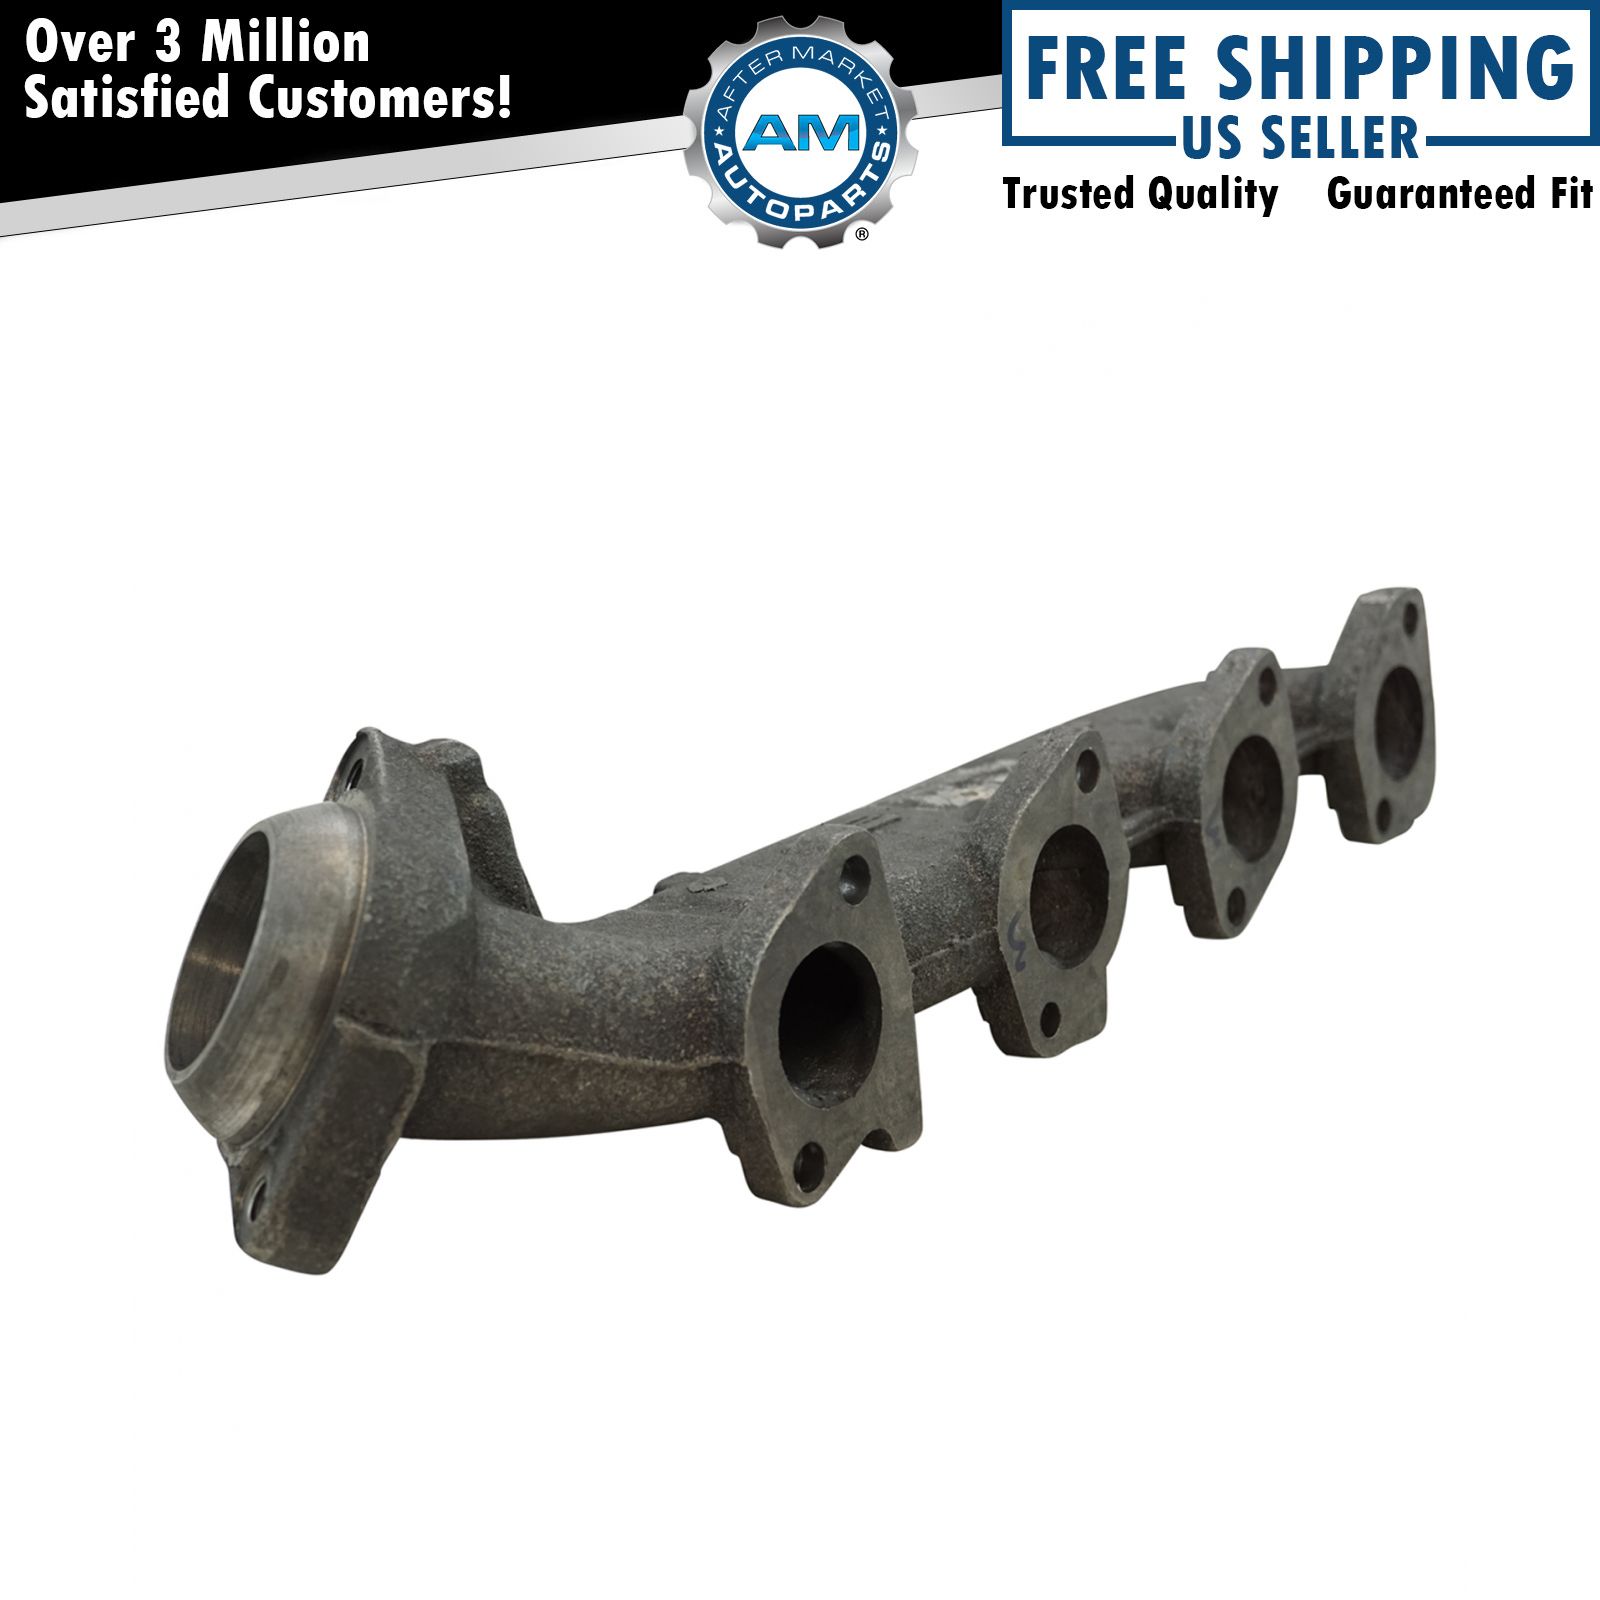 Dorman Engine Exhaust Manifold RH with Gasket & Hardware for Ford Truck SUV 5.4L